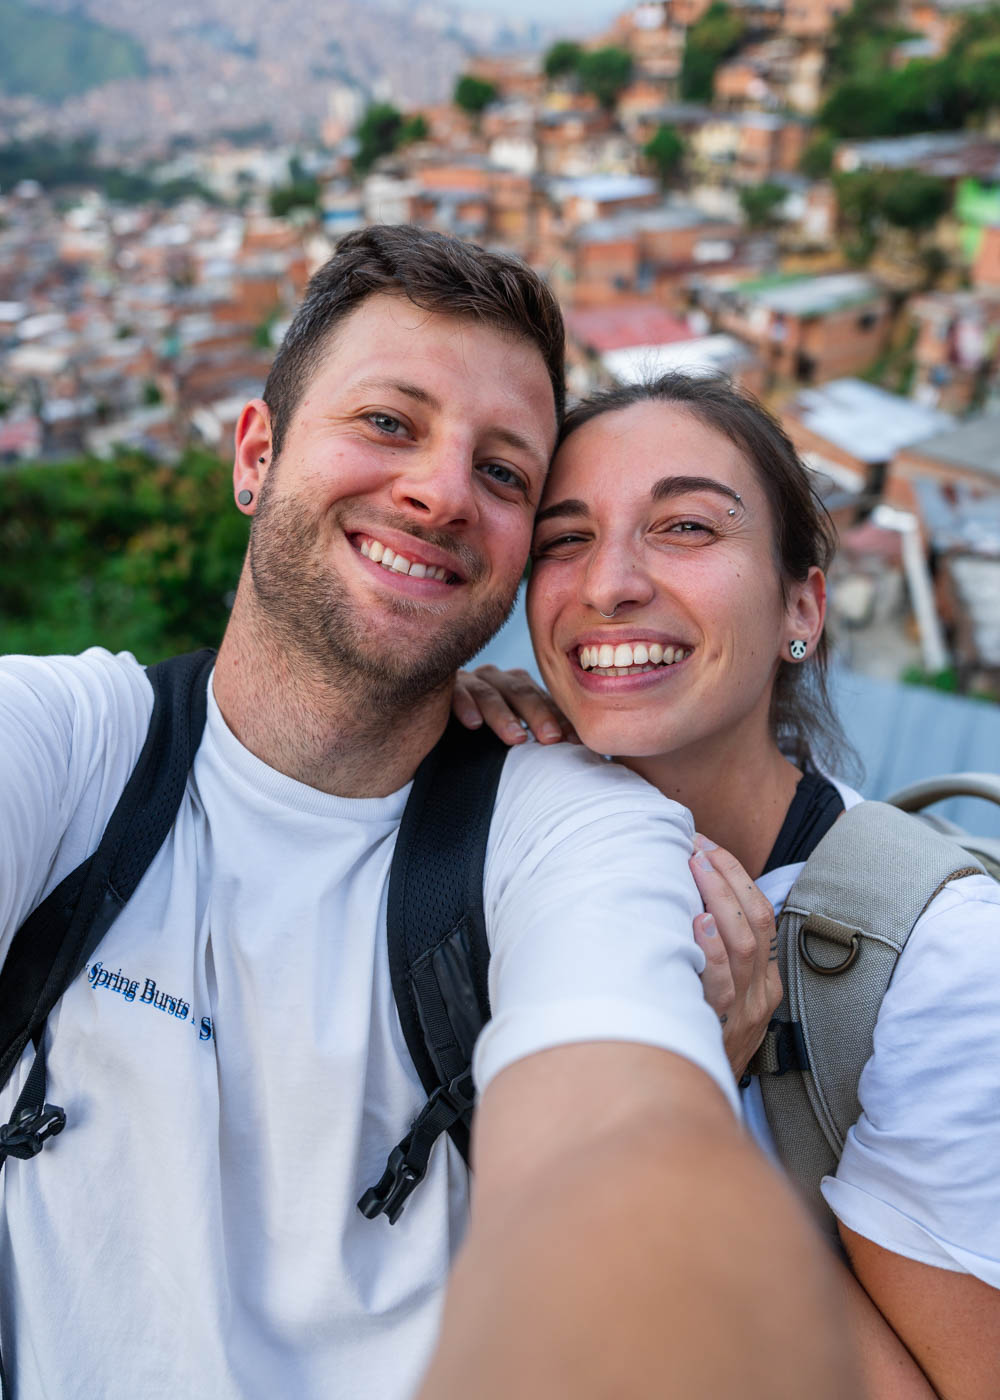 Sara and Ryan smiling while taking a selfie in comuna 13.